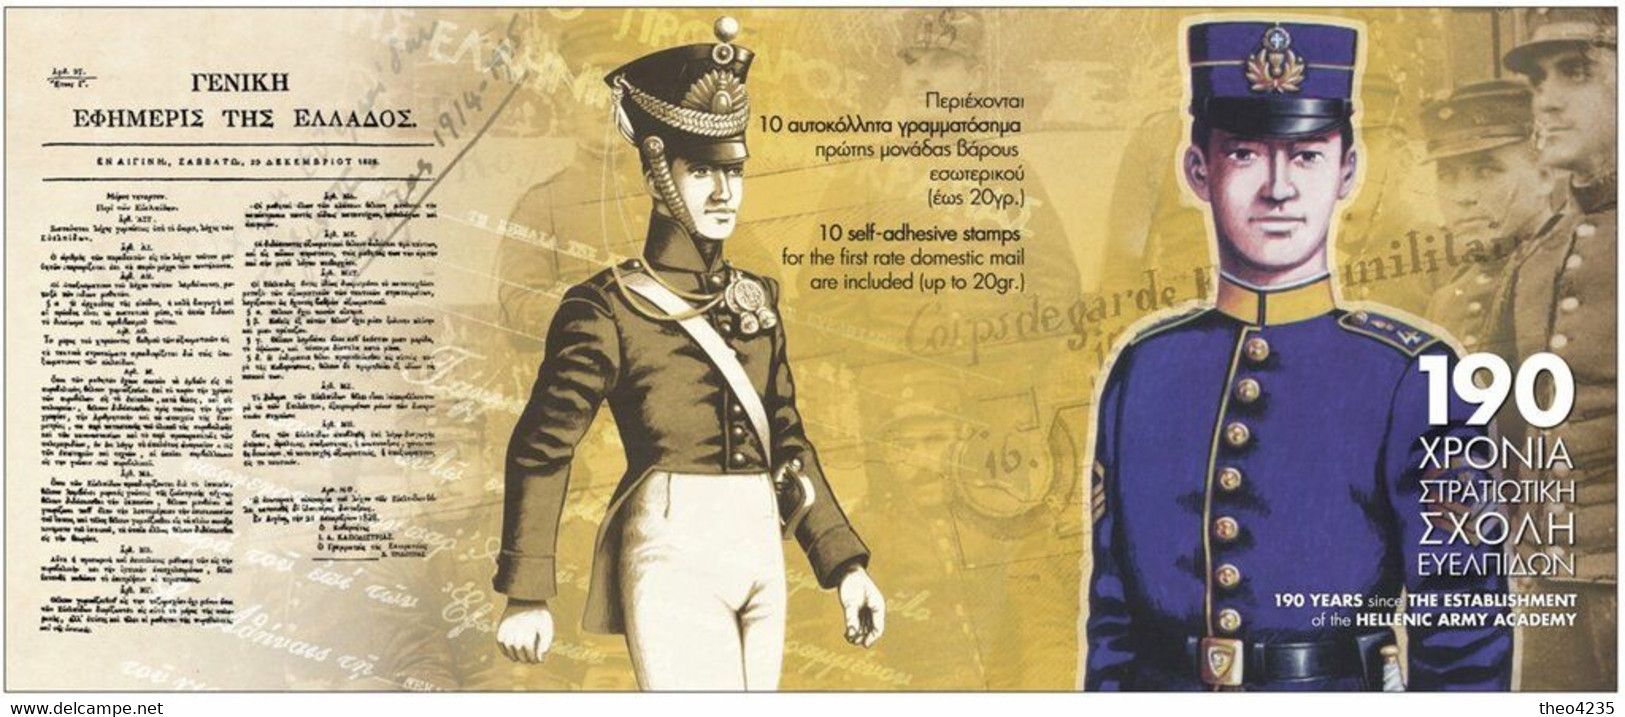 GREECE STAMPS 2018/190 YEARS SINCE THE ESTABLISHMENT OF THE HELLENIC ARMY ACADEMY-SELF ADHESIVE BOOKLET-  15/6/18 - Hologramme